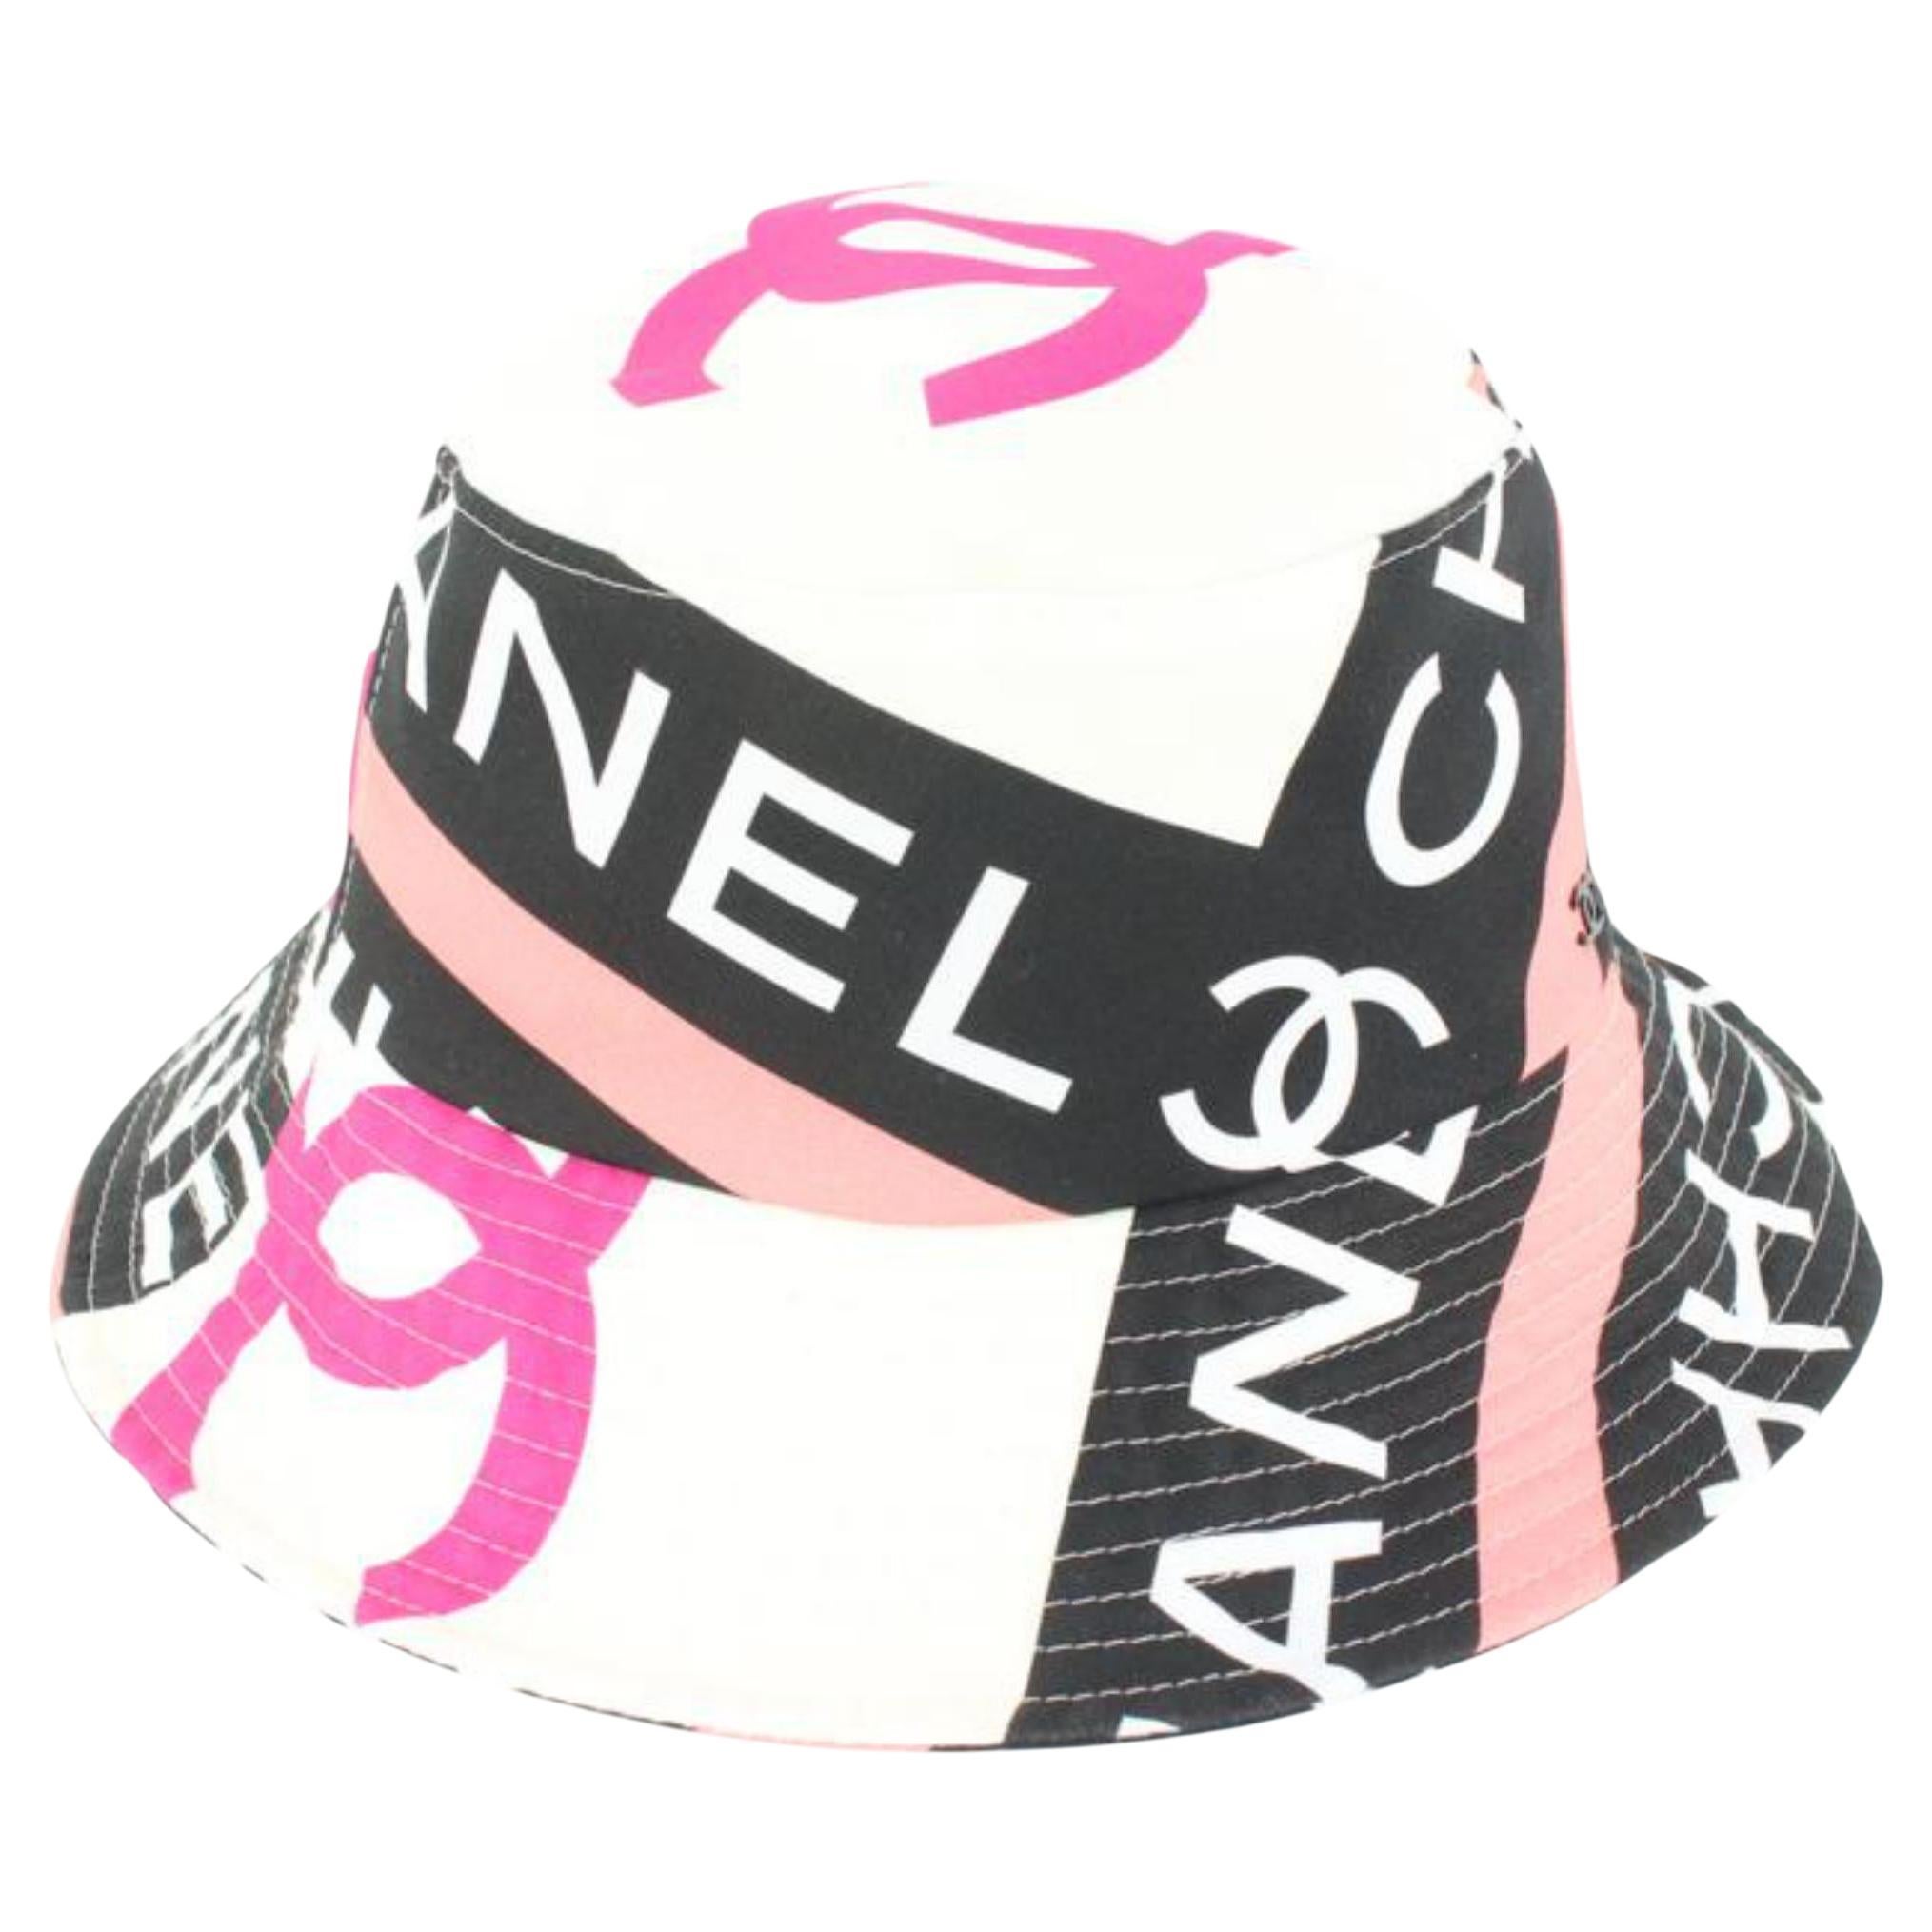 NWT Auth. CHANEL CC Embroidered Logo Pink Cotton Baseball Cap Hat One Size